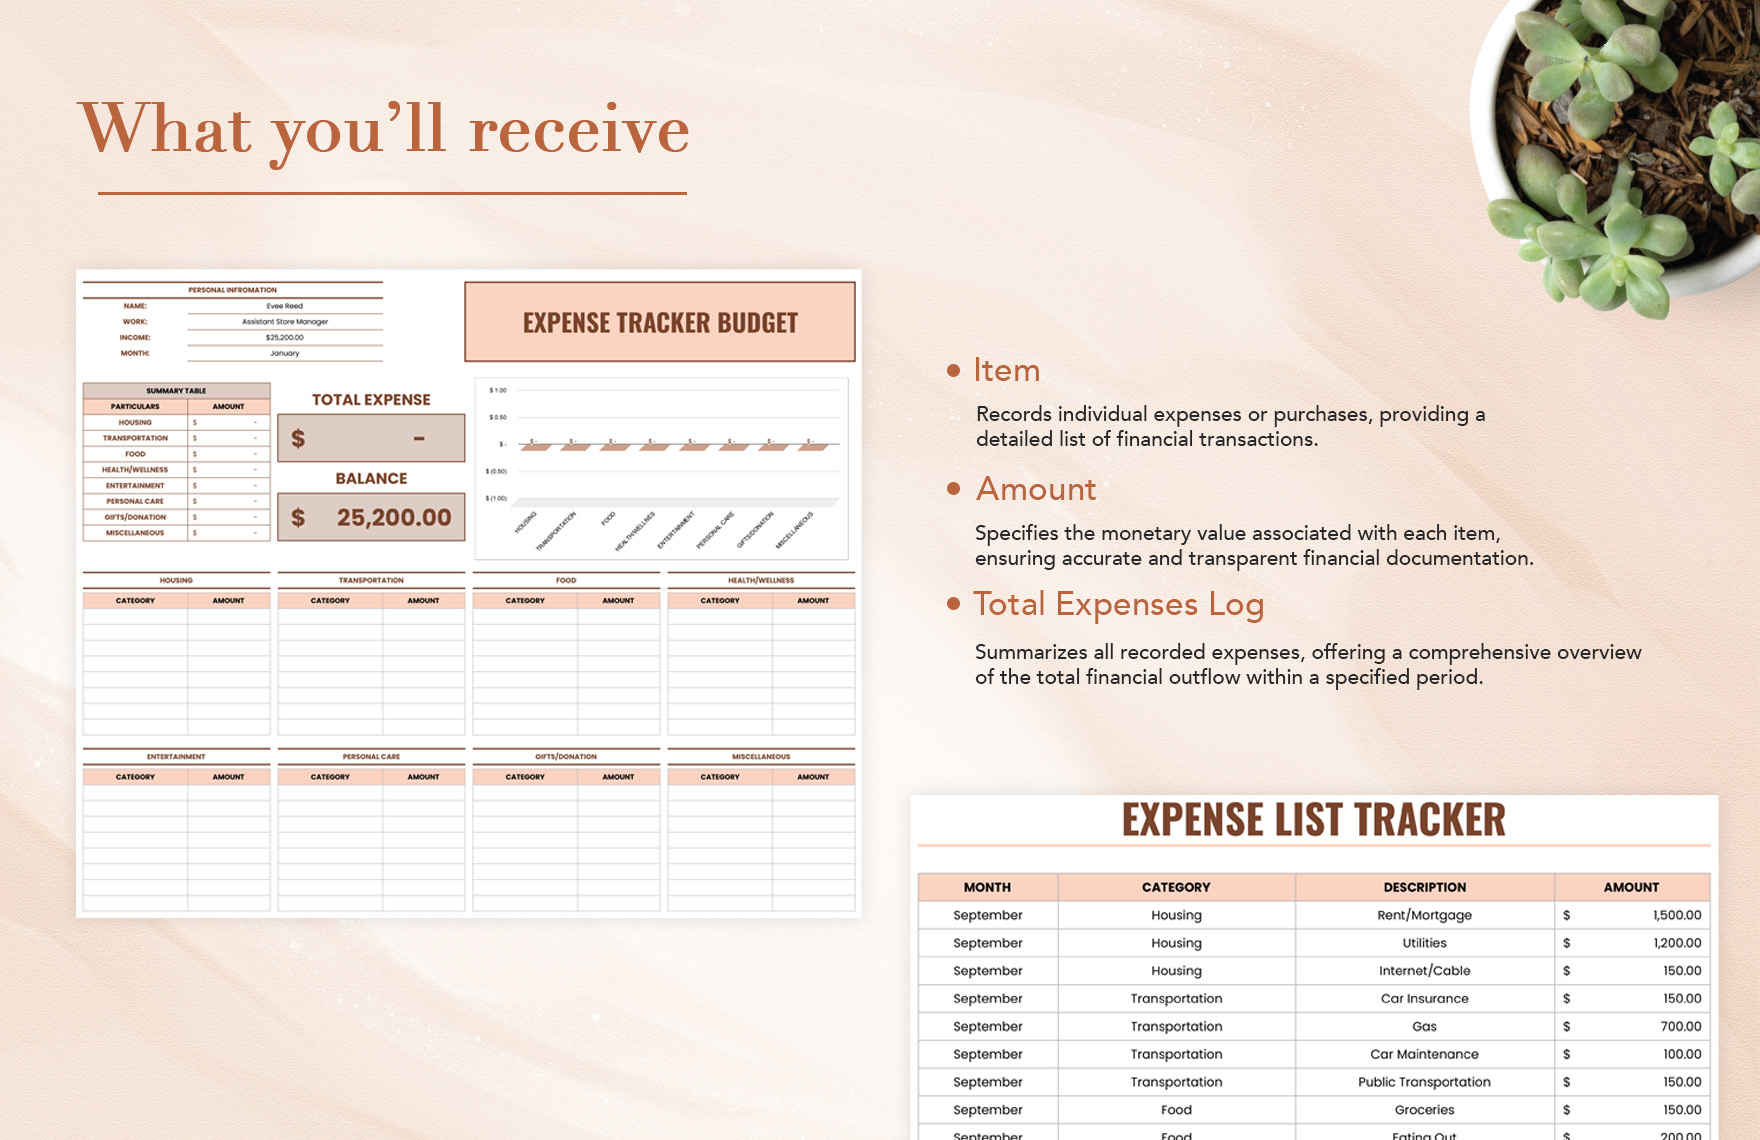 Expense Tracker Budget Template